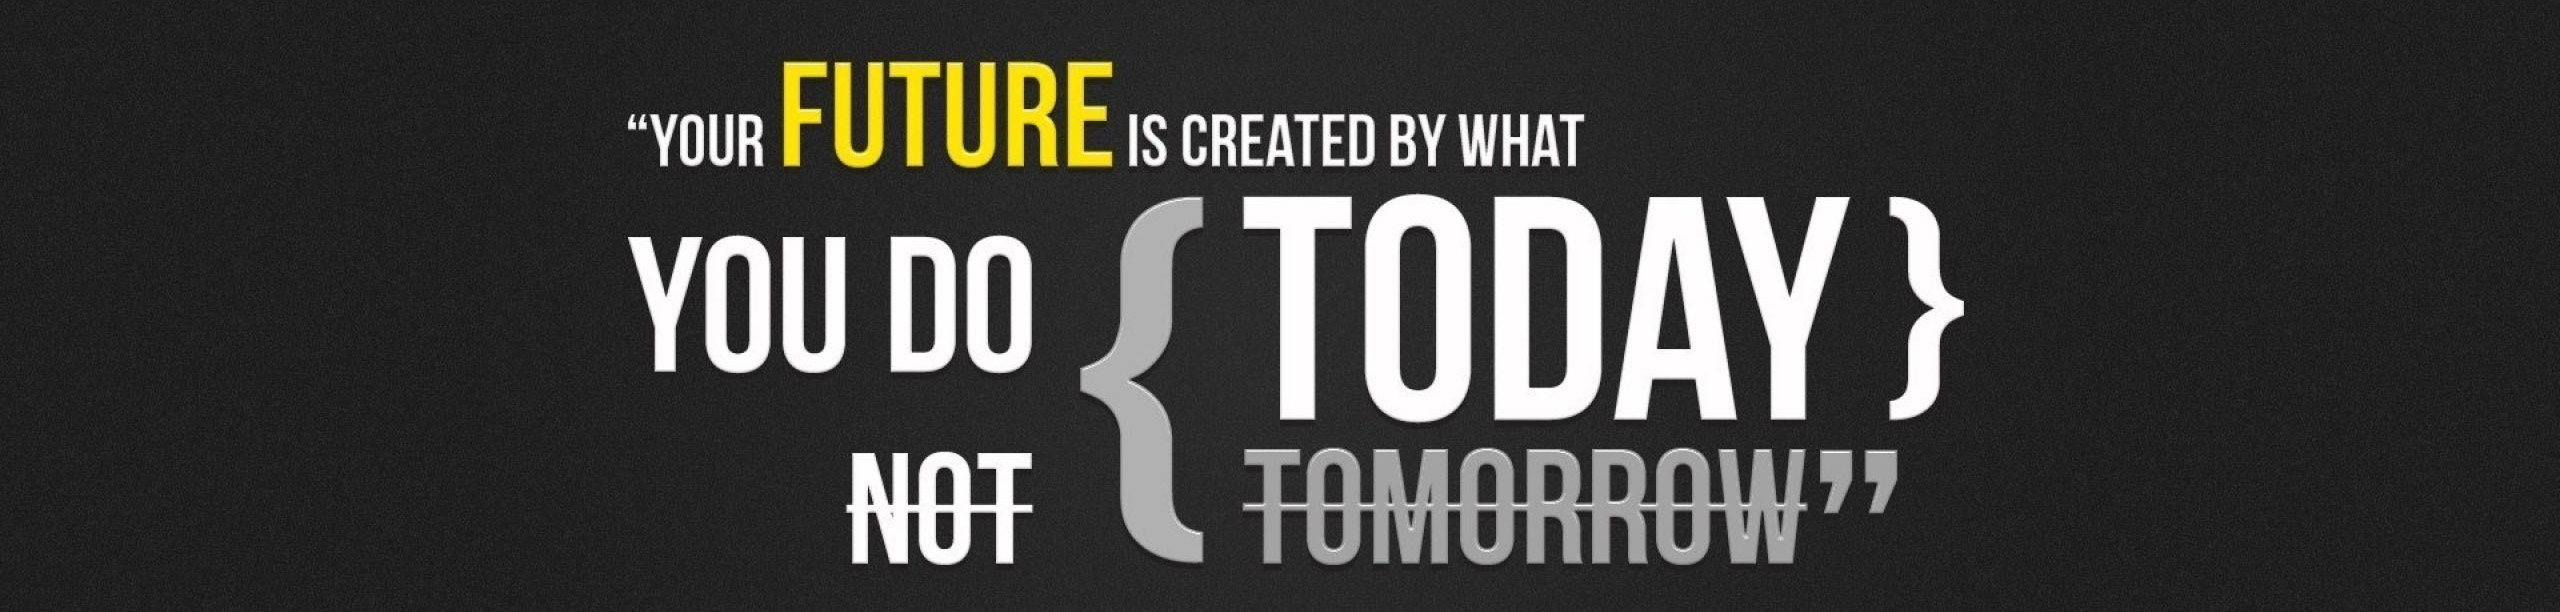 "Your future is created by what you do today, not tomorrow"